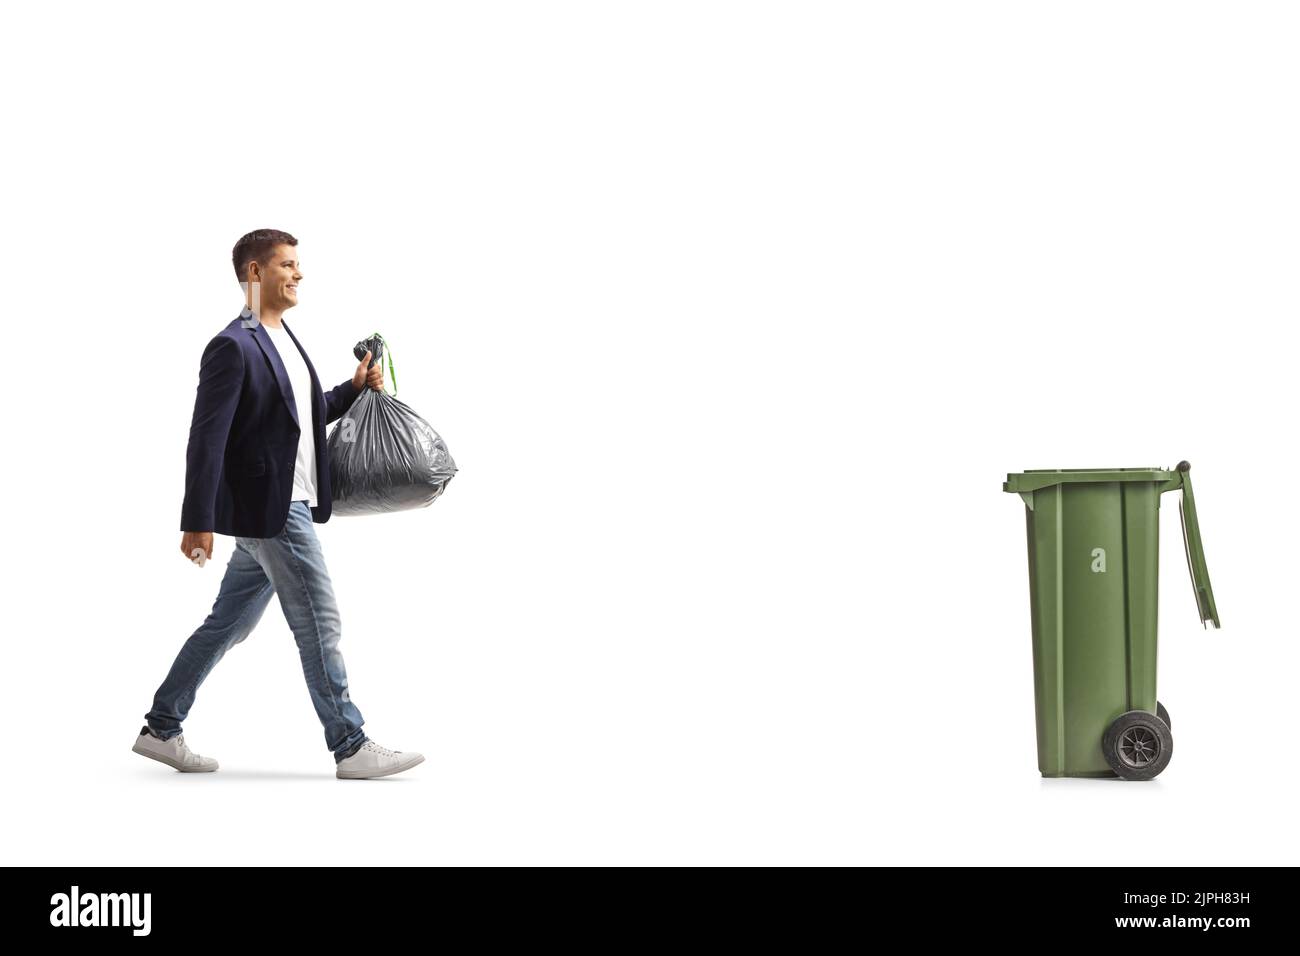 Full length profile shot of a man walking towards a bin and carrying a plastic waste bag isolated on white background Stock Photo